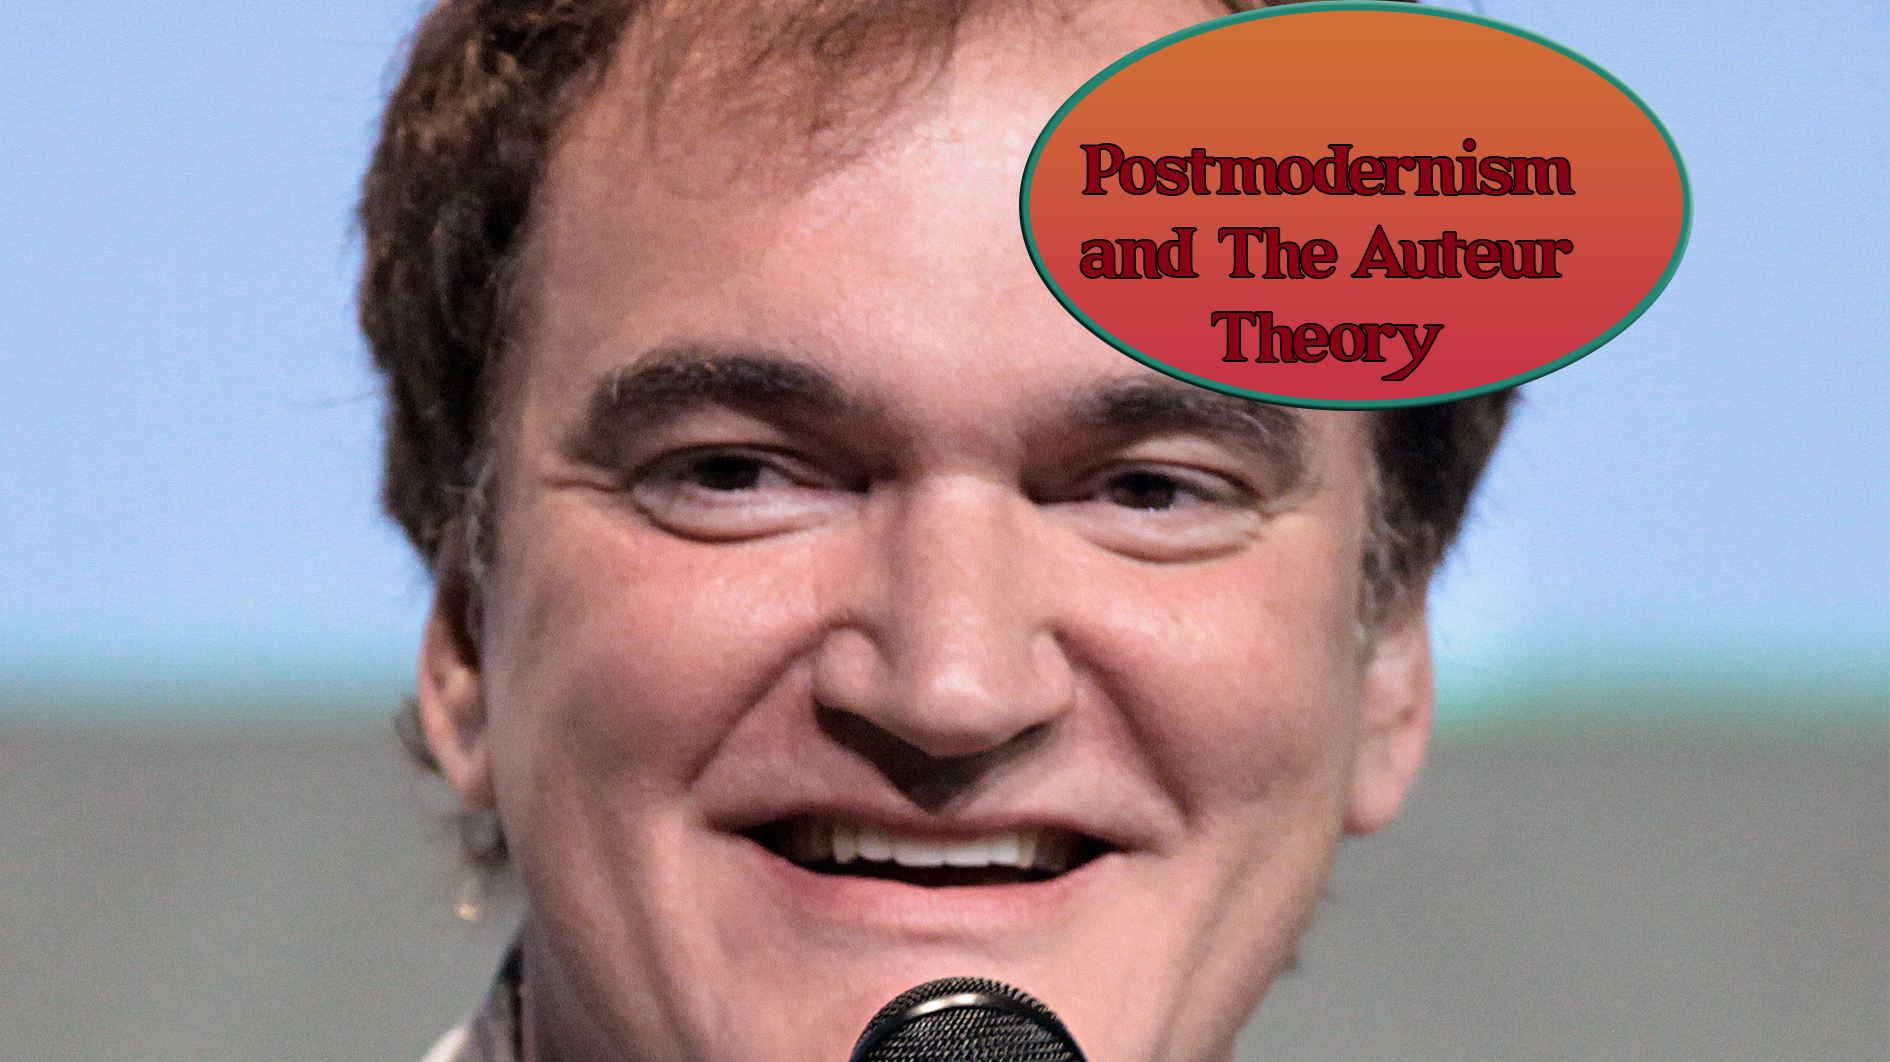 Post Modernism and The Auteur Theory Photo of Quentin Tarantino by Gage Skidmore